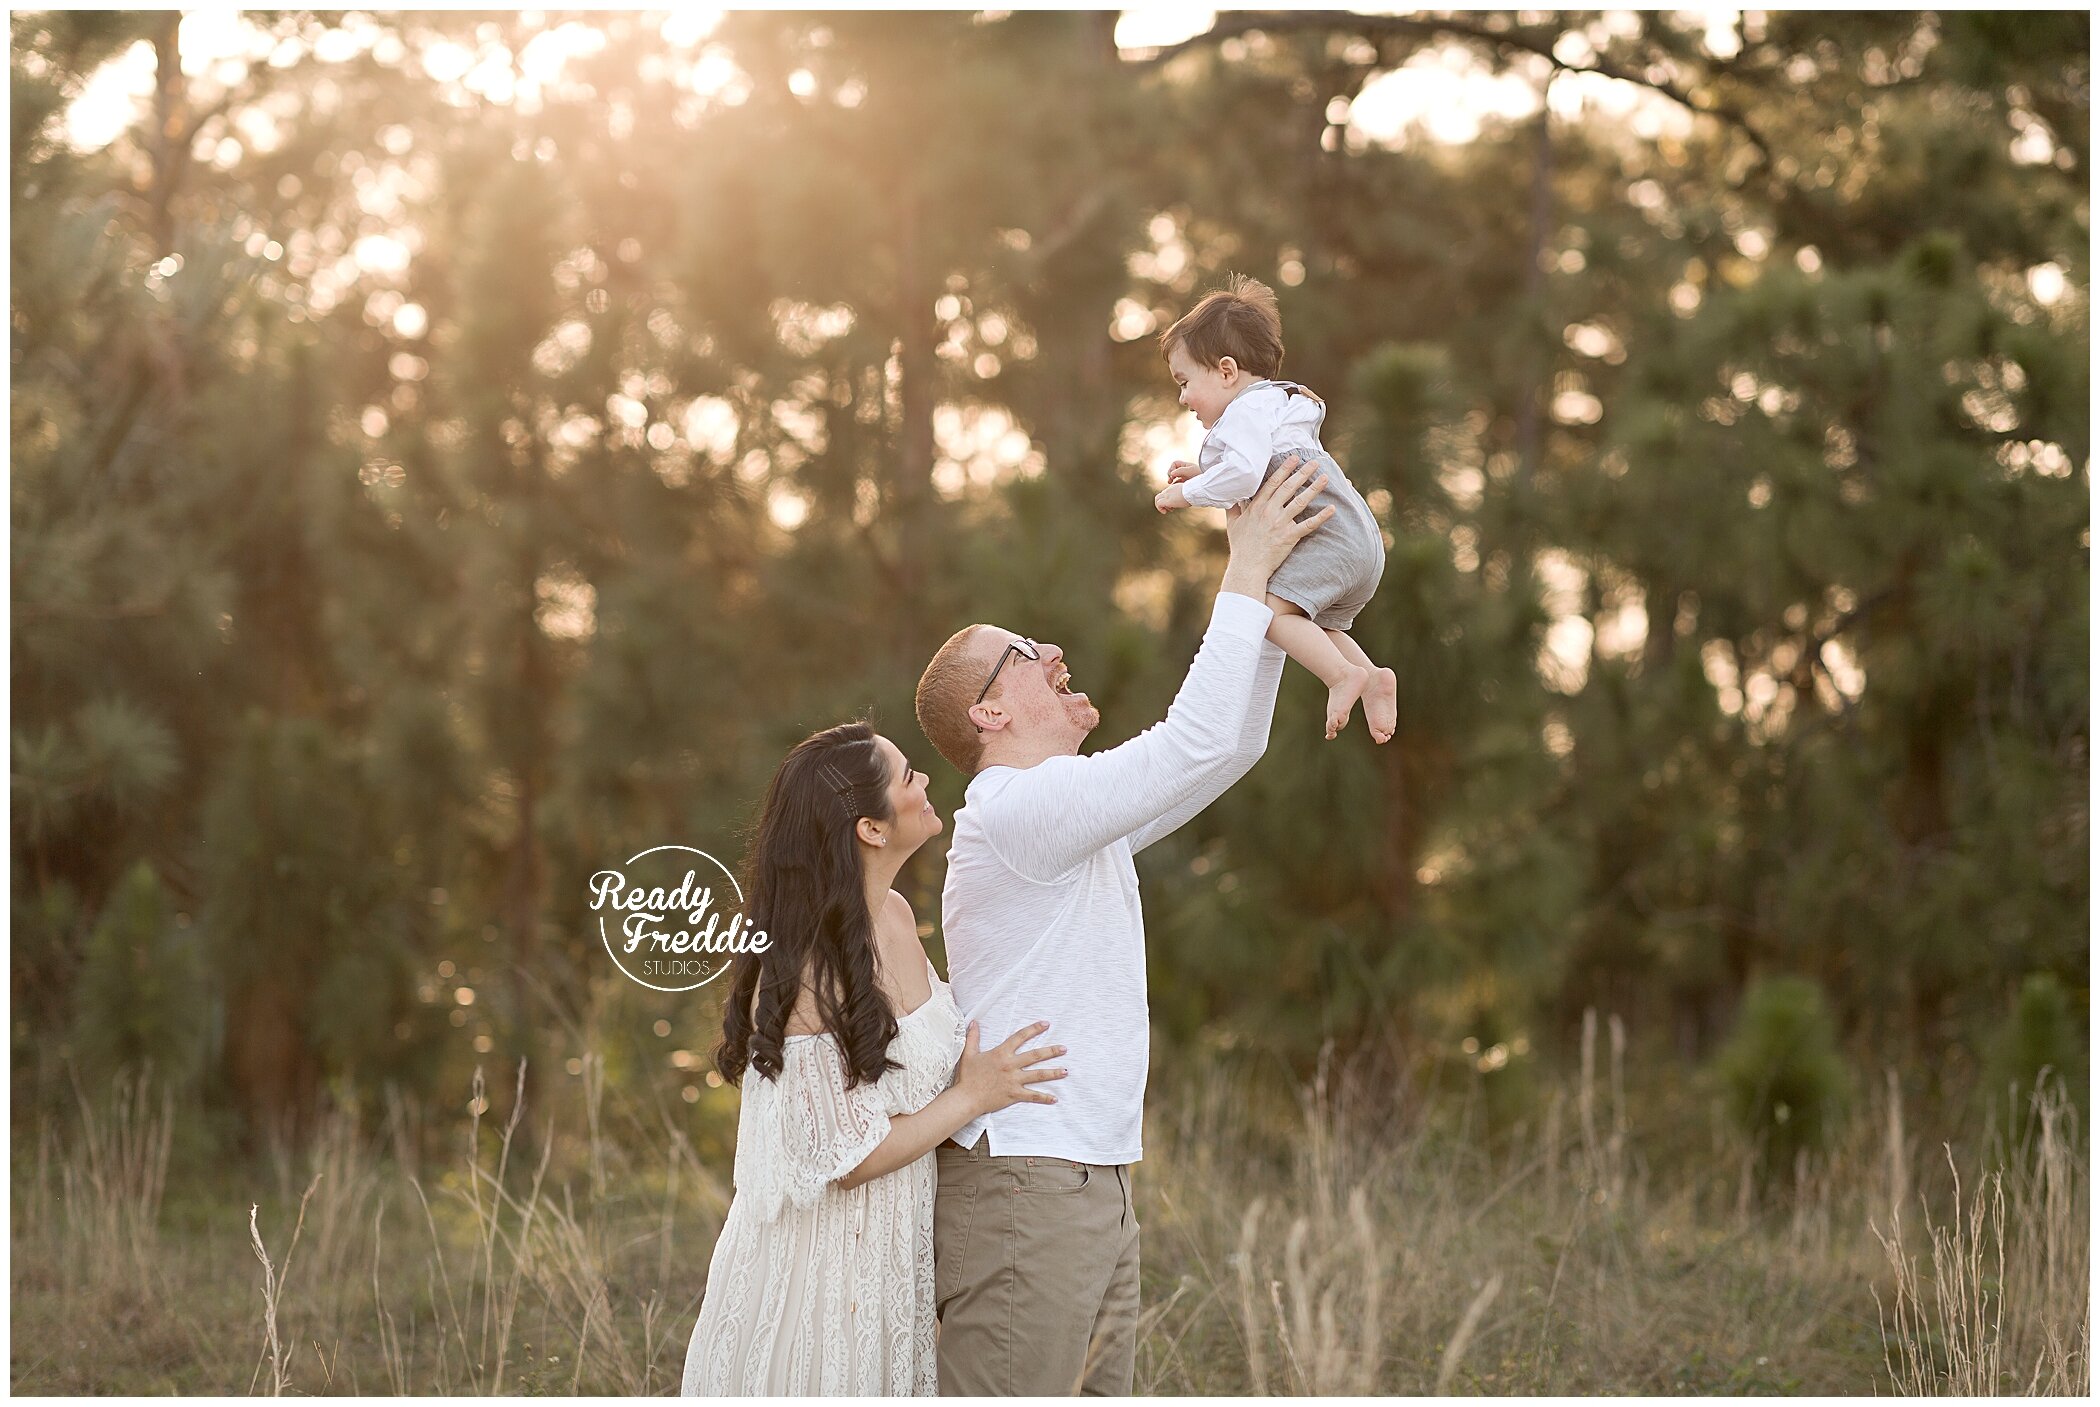 Miami photography family session during sunset with Ivanna Vidal Photography